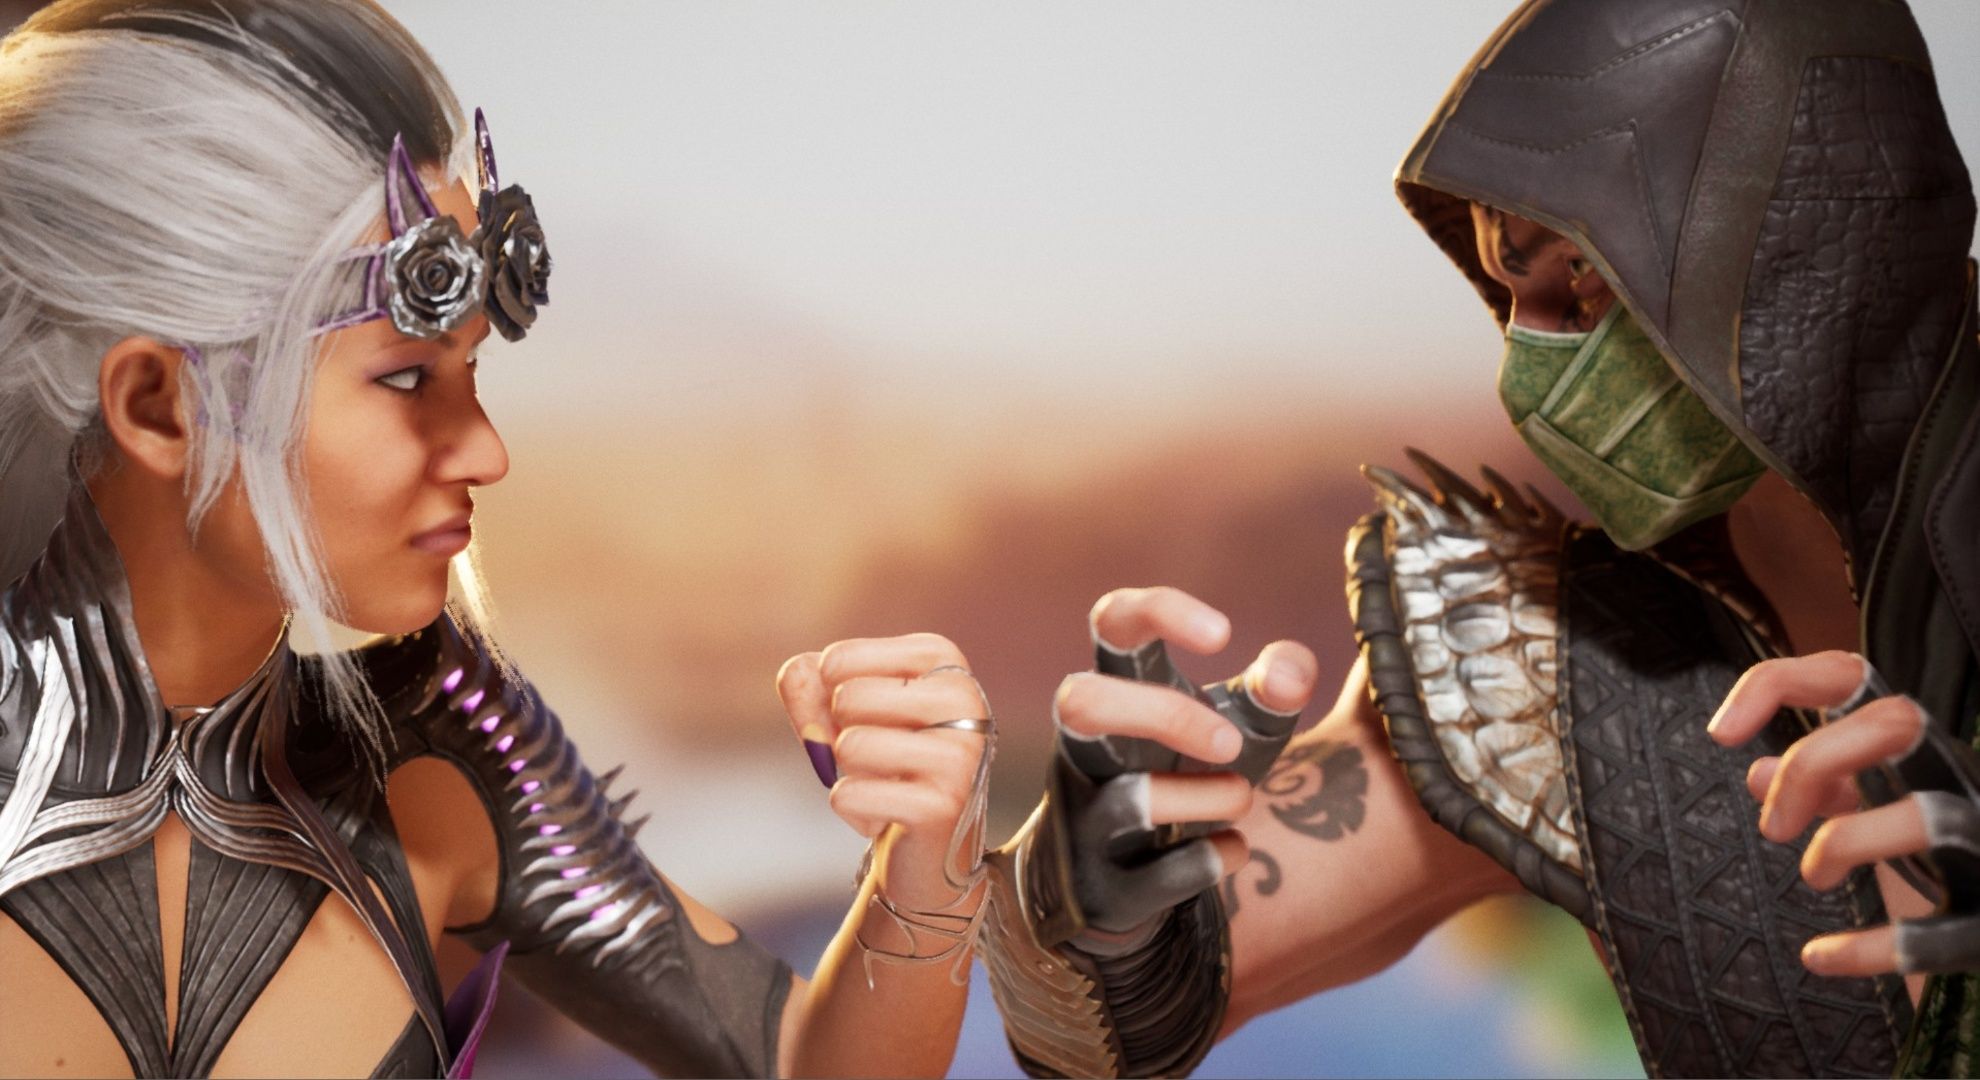 Sindel and Reptile clashing before they fight each other in Mortal Kombat 1.